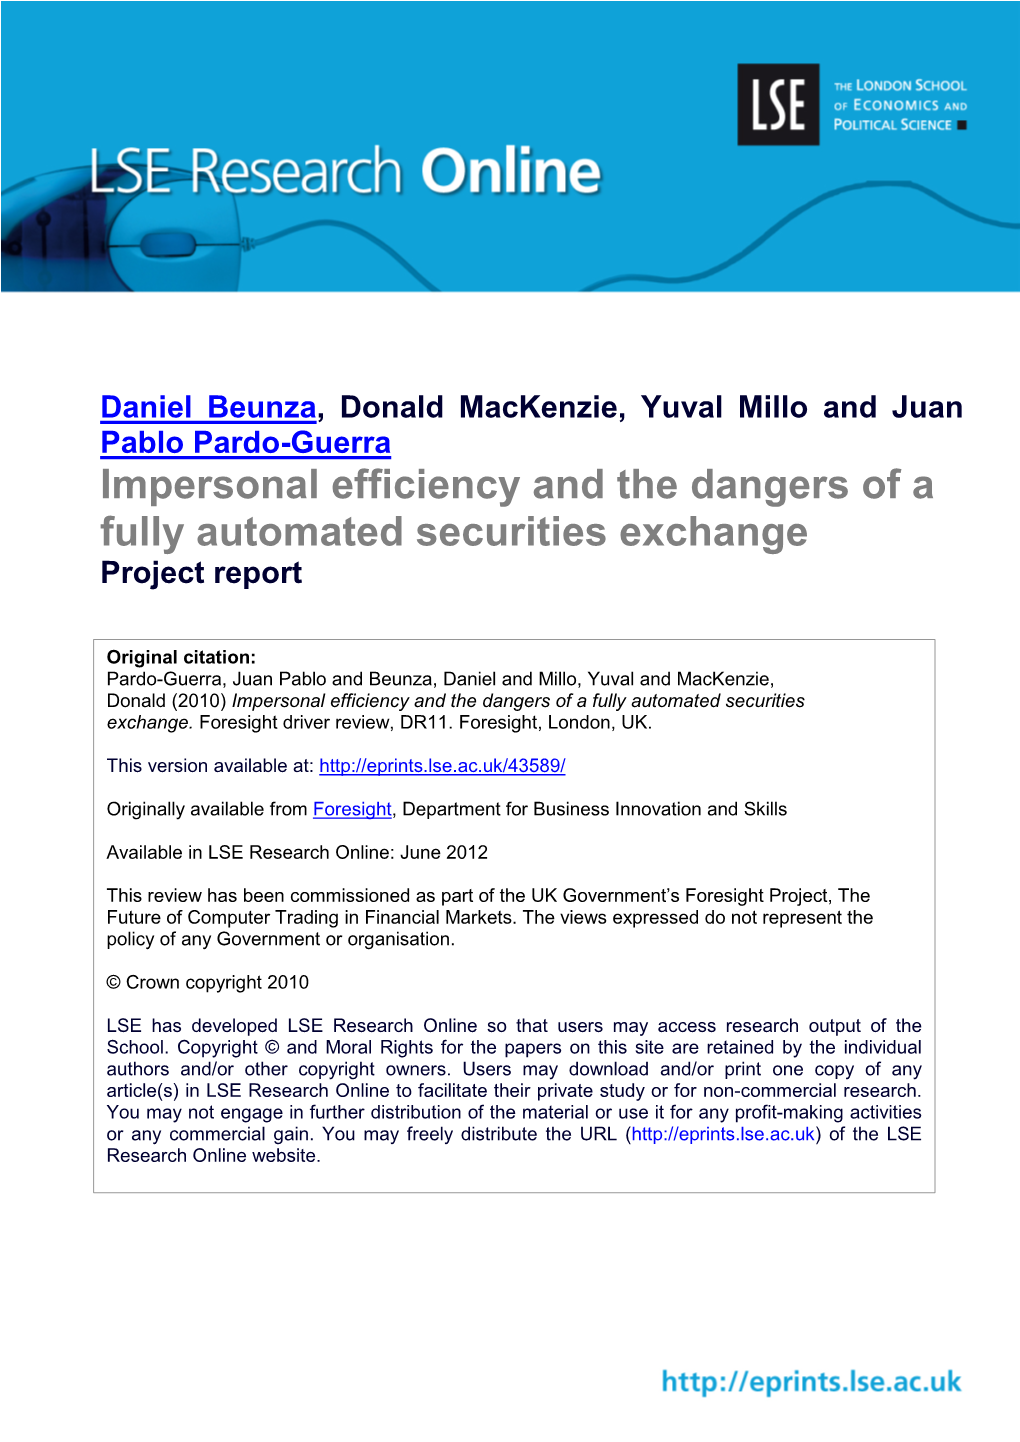 Impersonal Efficiency and the Dangers of a Fully Automated Securities Exchange Project Report